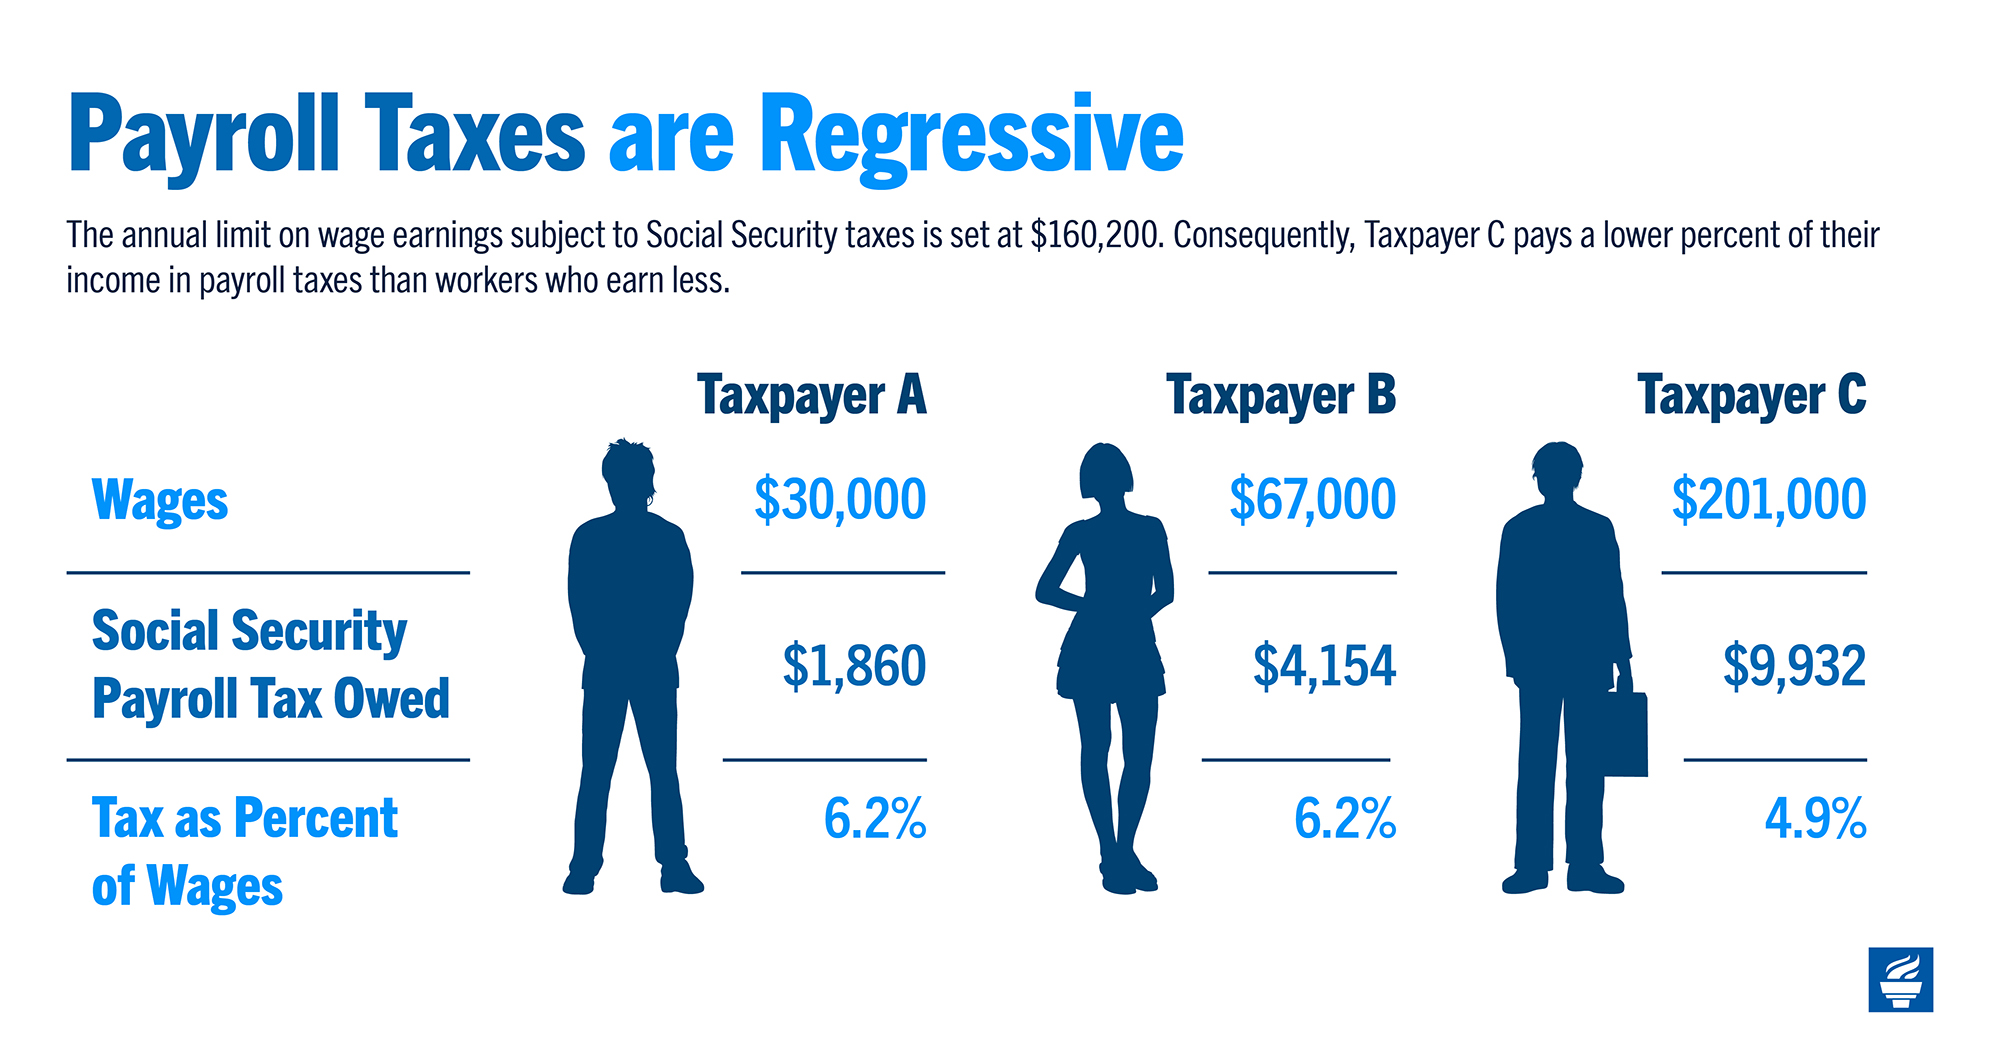 Payroll Taxes are Regressive